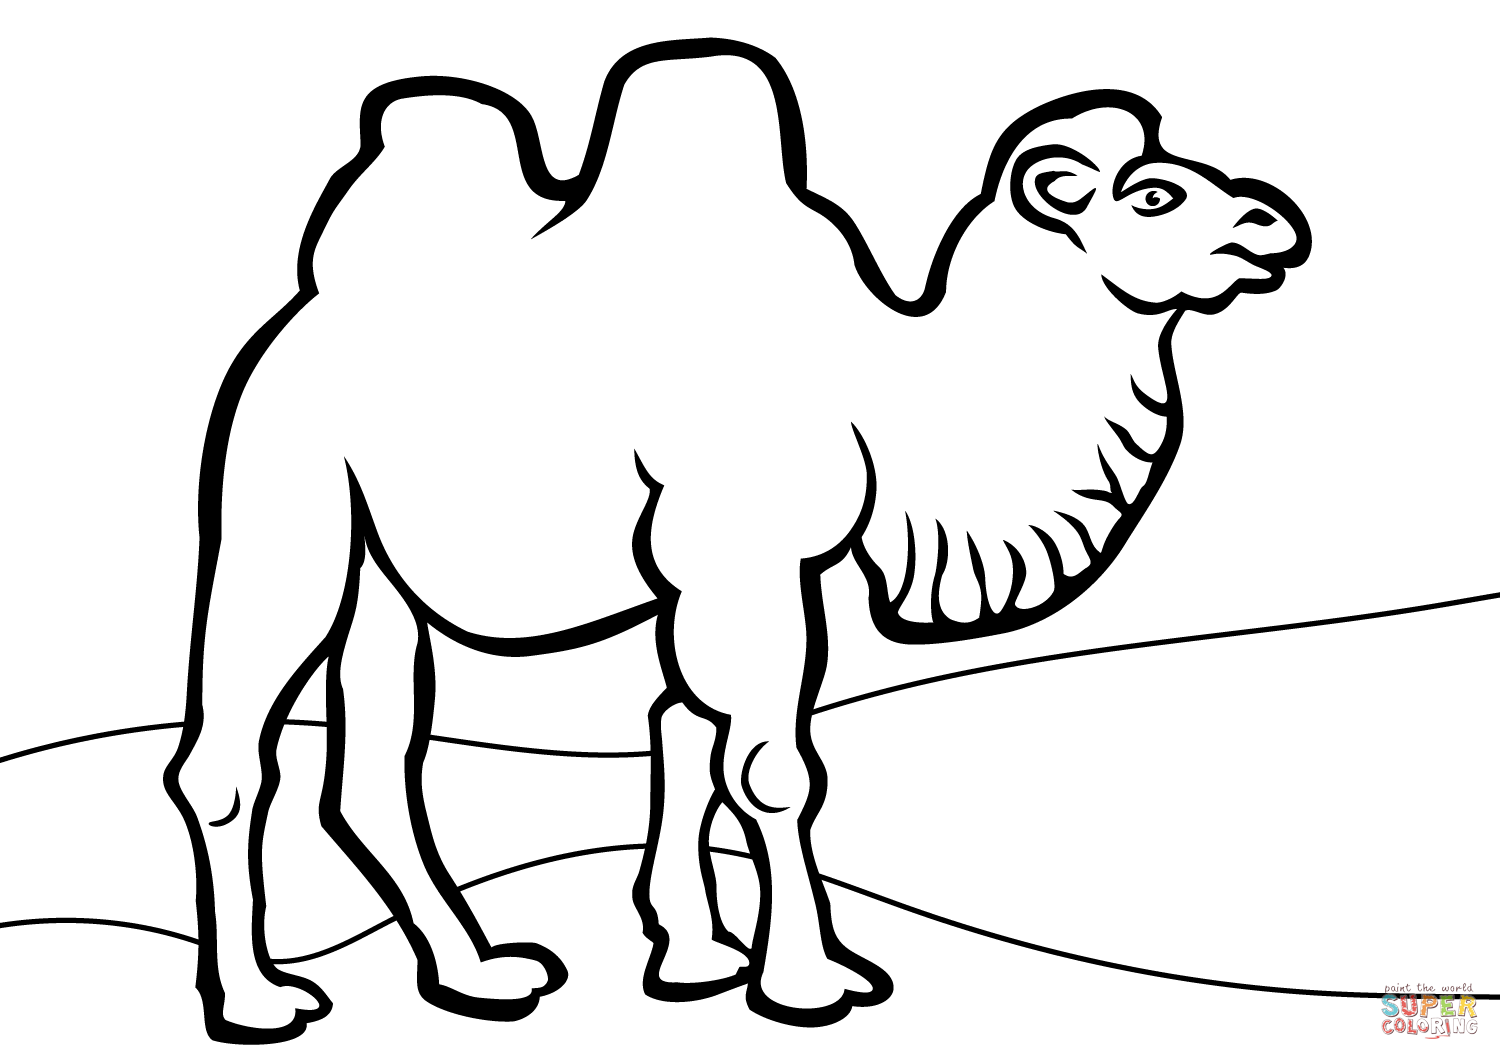 Bactrian camel coloring page free printable coloring pages